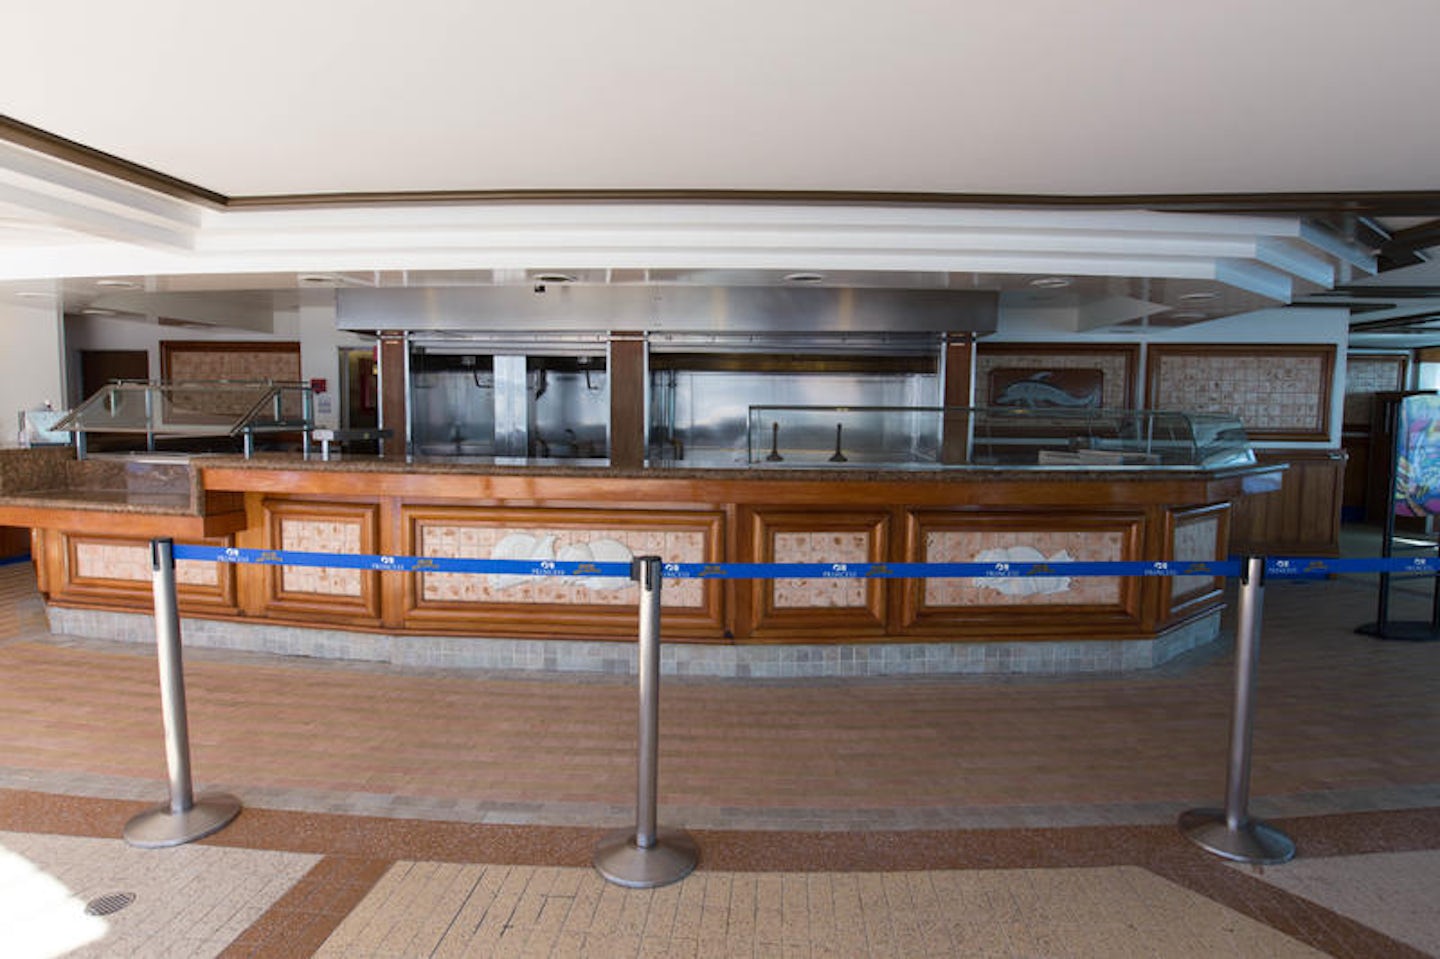 Trident Grill on Crown Princess